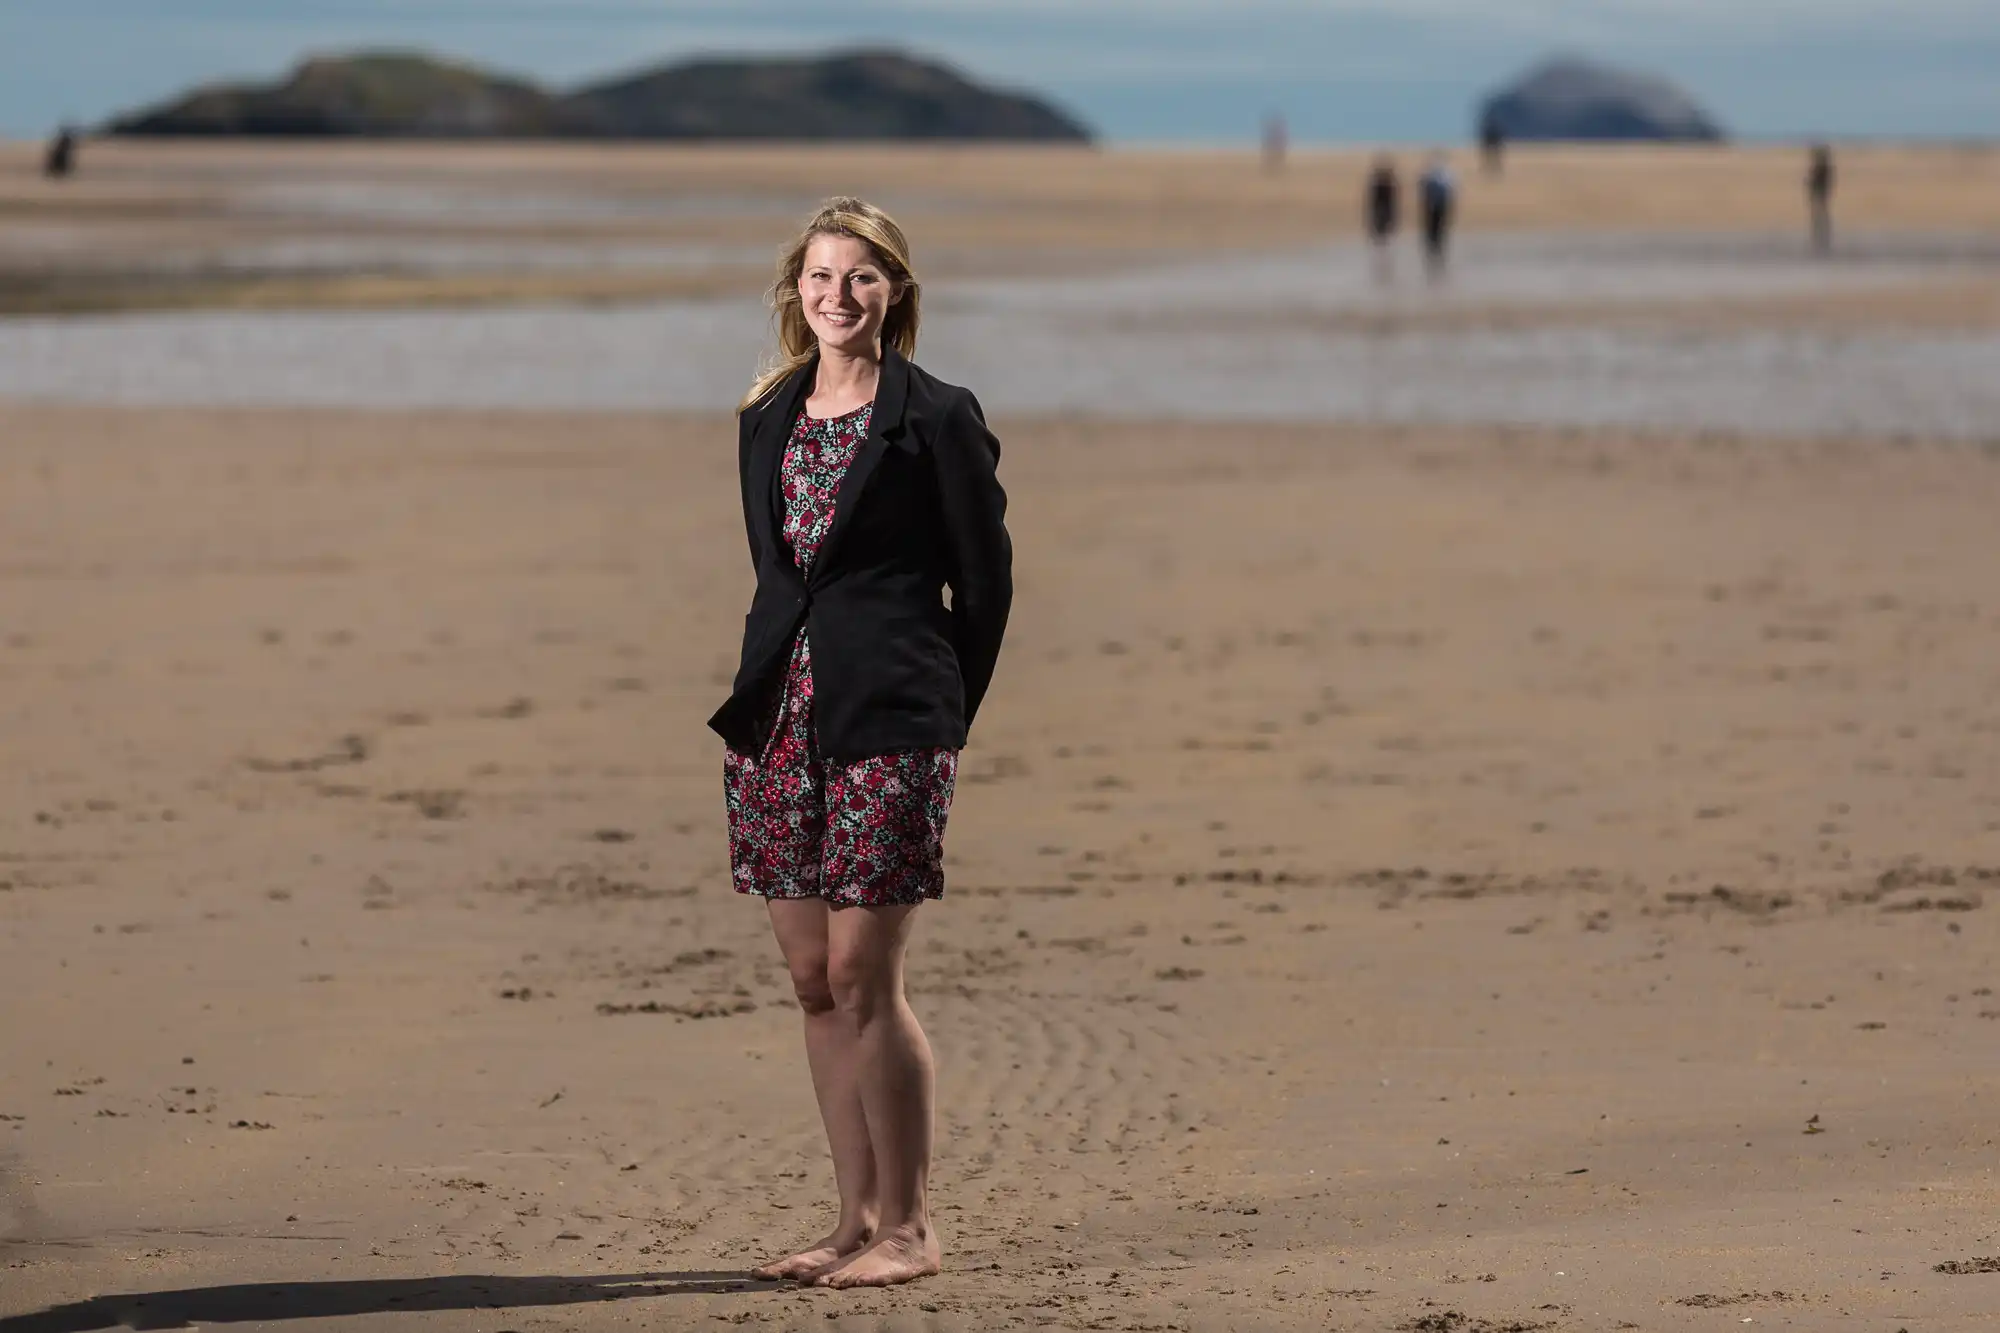 A woman in a floral dress and blazer standing barefoot on a sandy beach, smiling, with distant figures and rocks behind her.